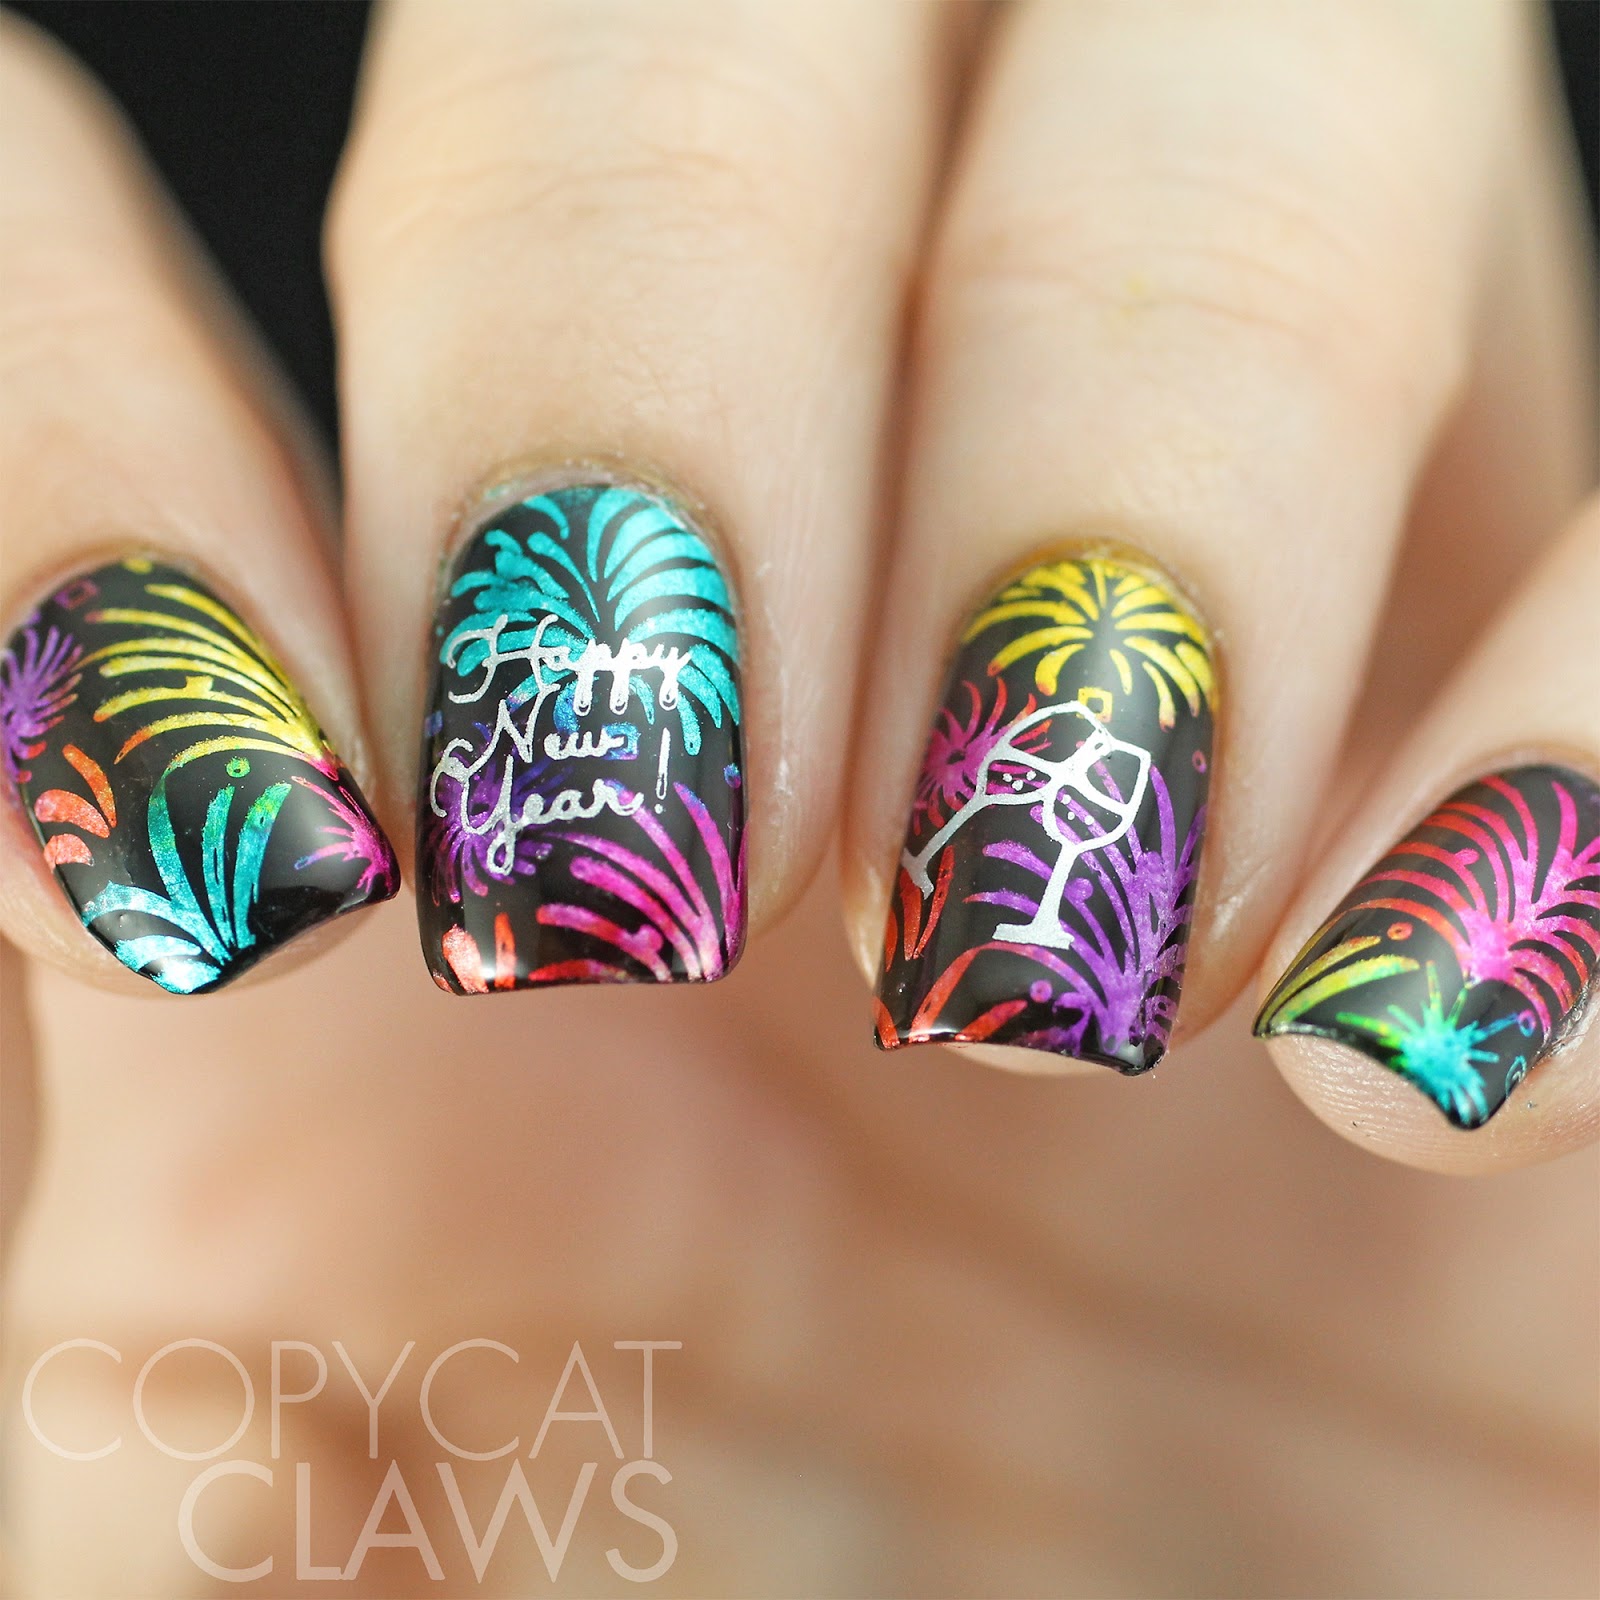 Copycat Claws: 40 Great Nail Art Ideas - New Year